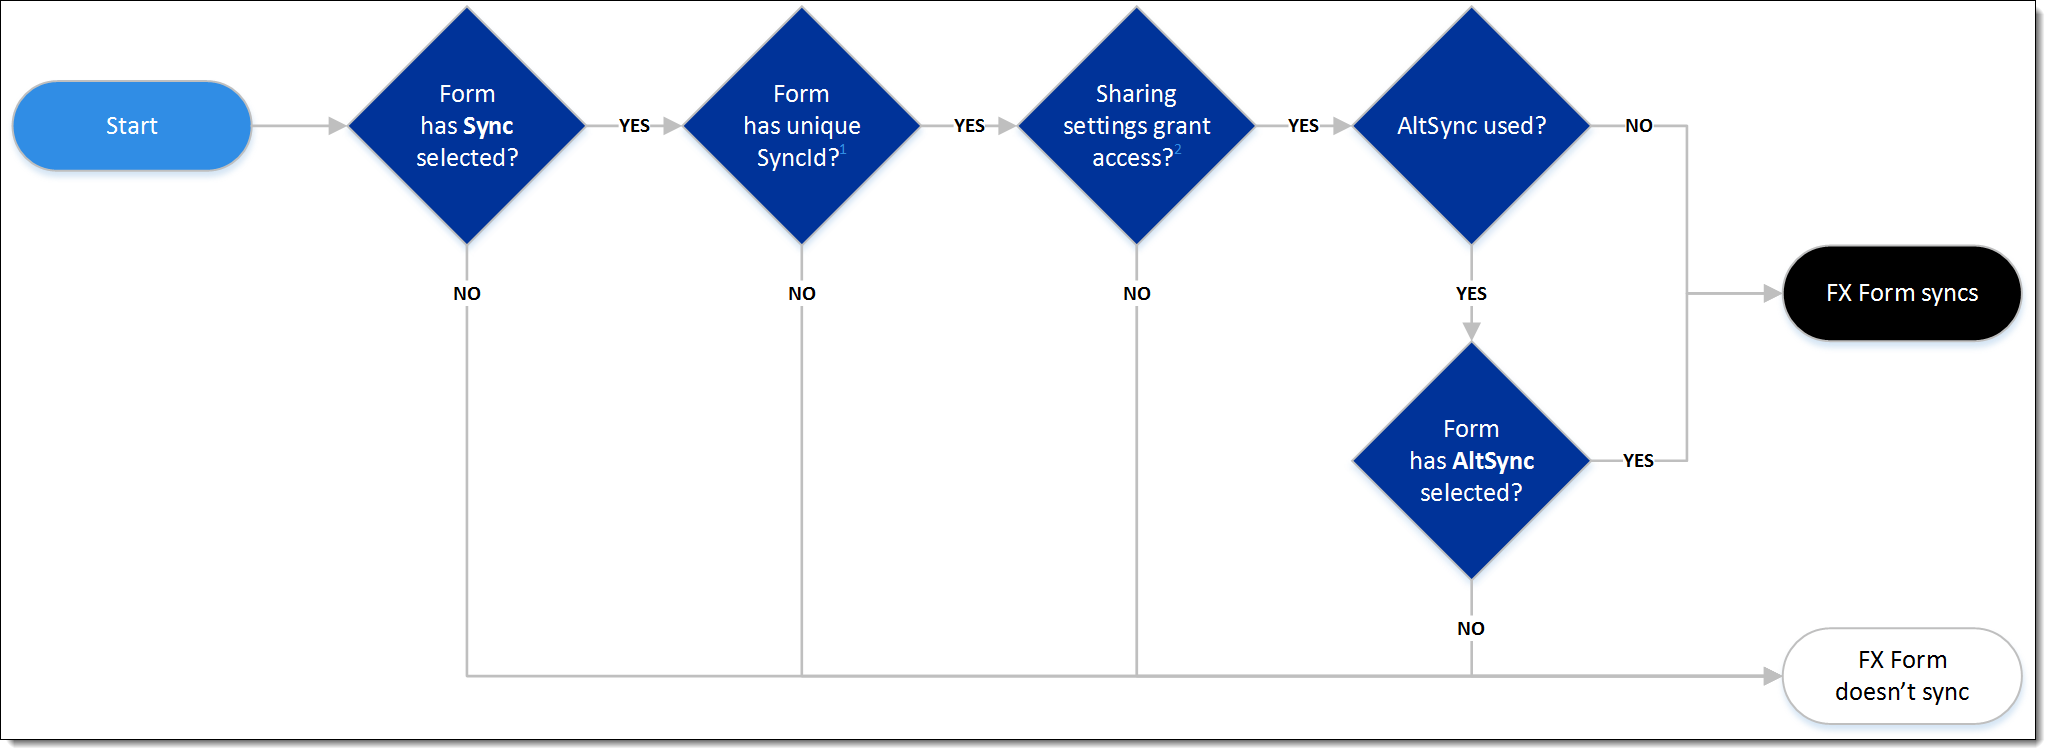 A flowchart of the above table of questions for FX Form sync